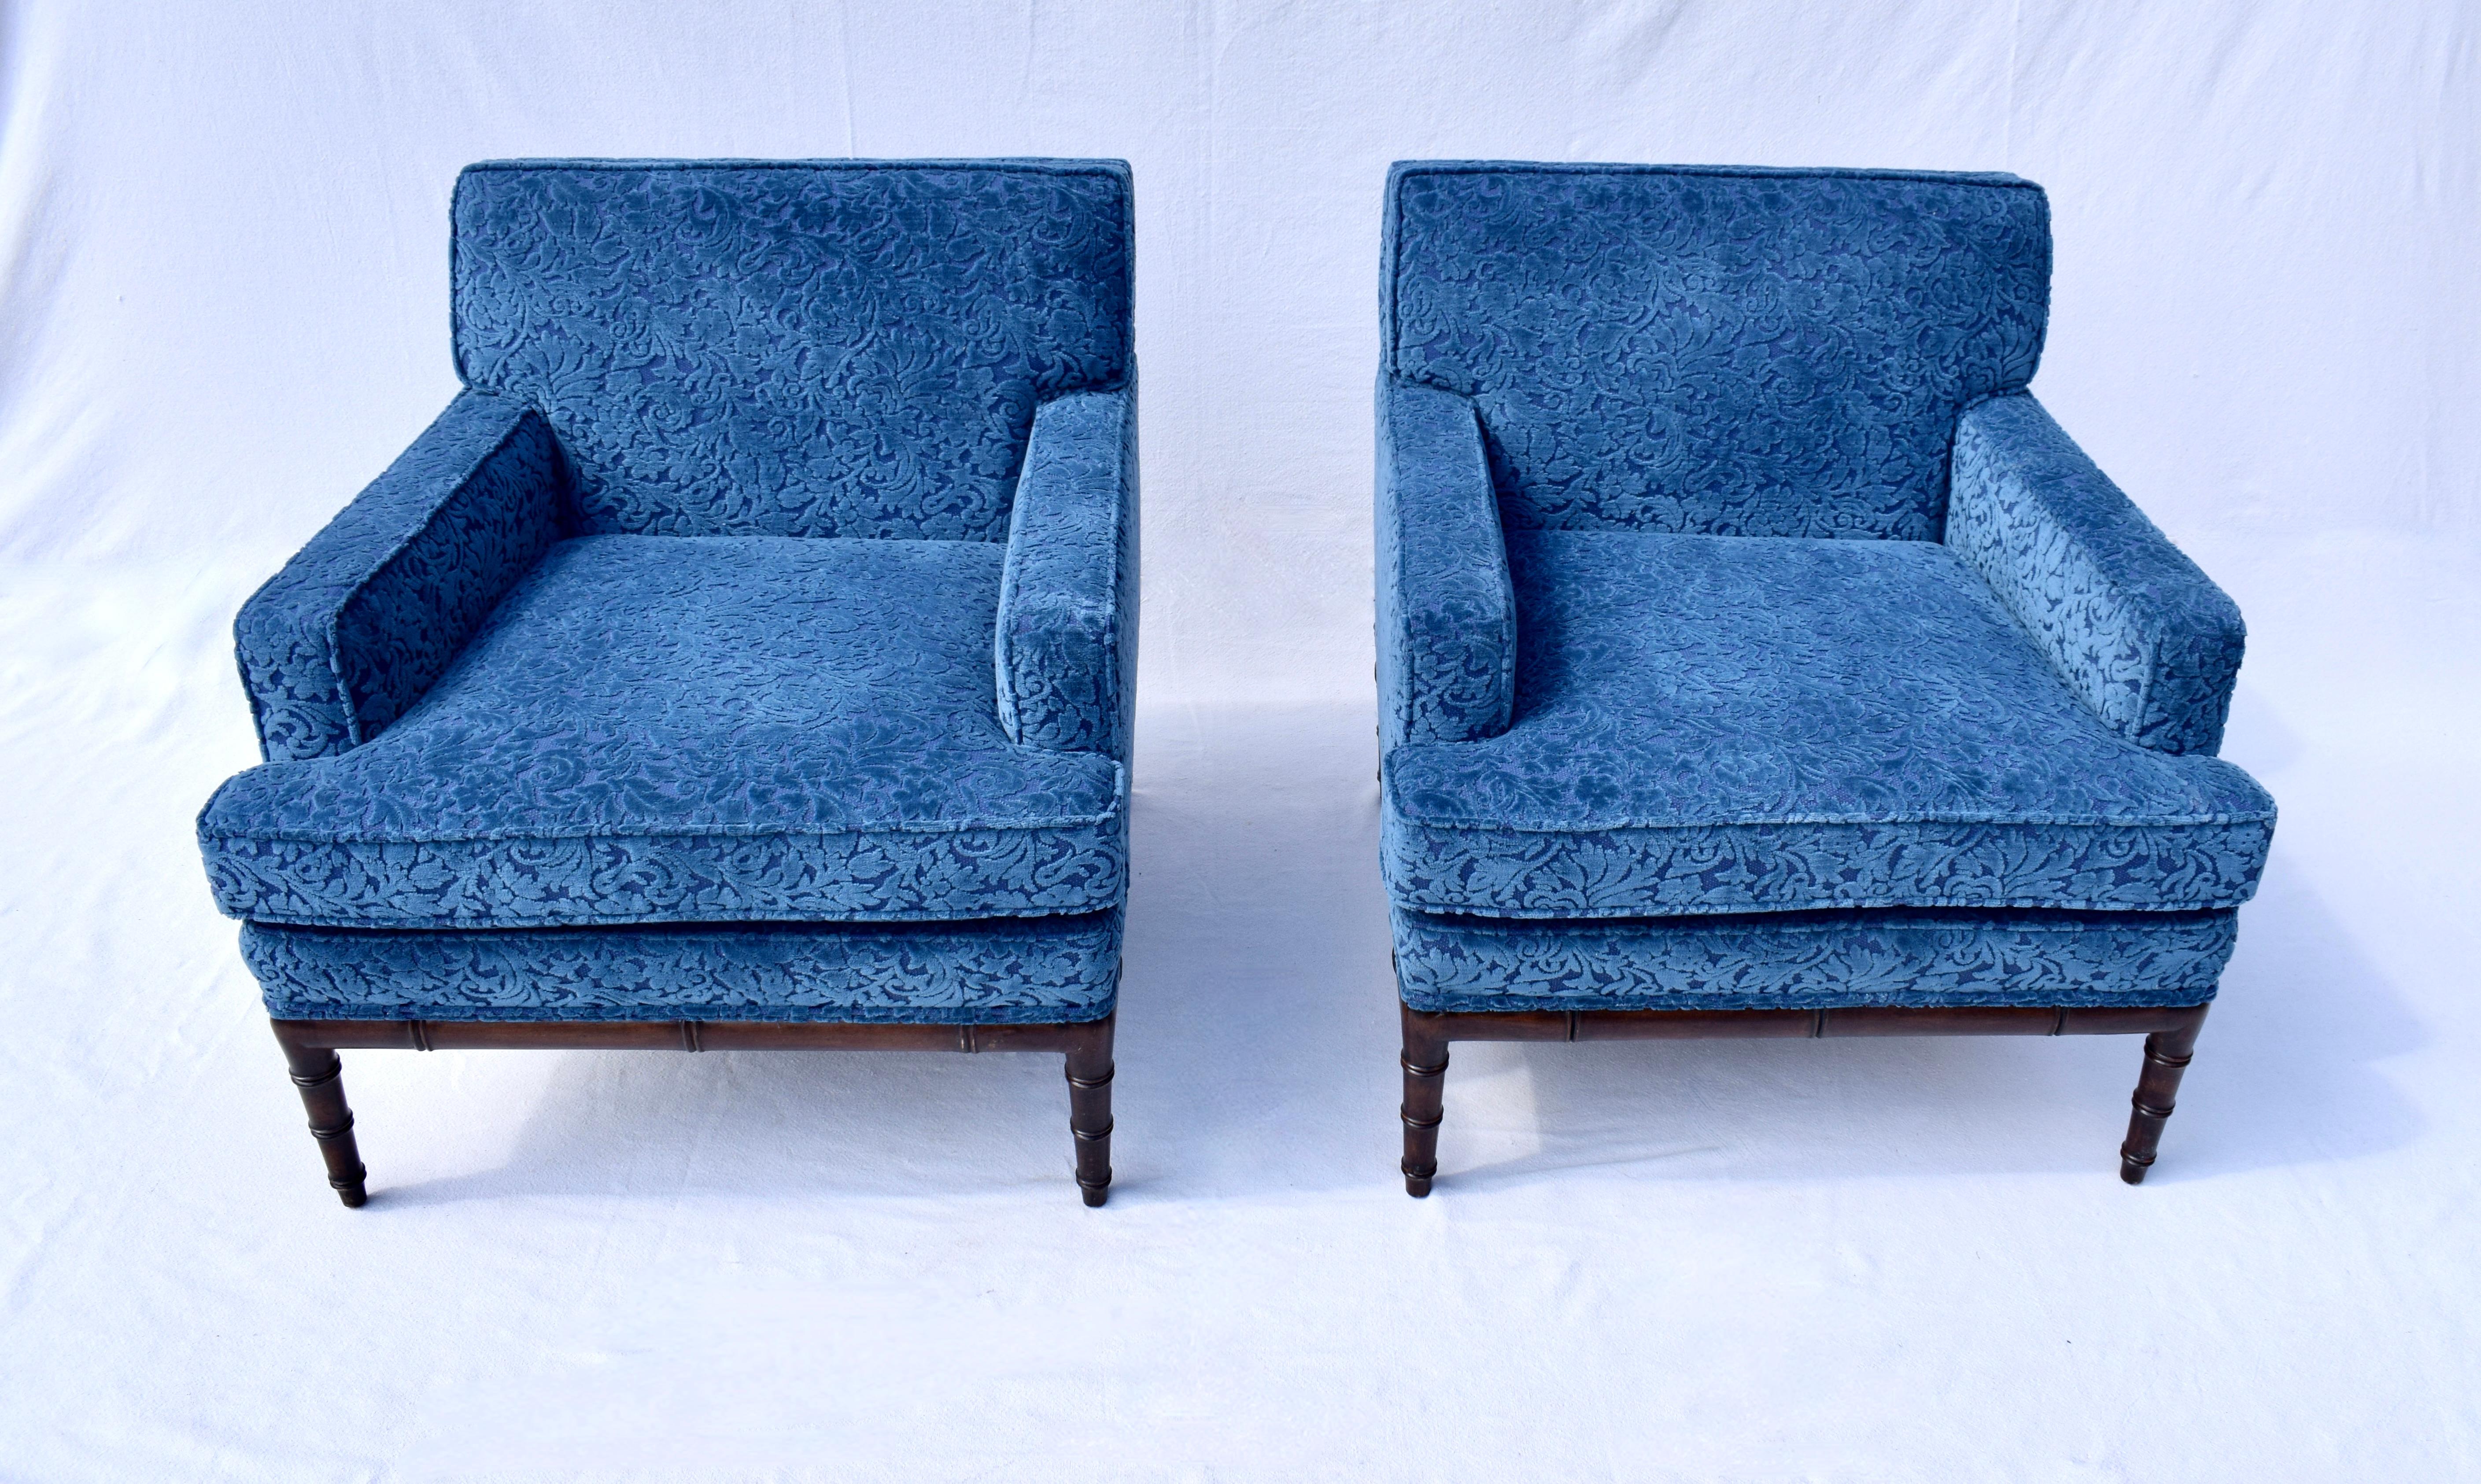 Vibrant Indigo blue cut velvet pair of 1960's club chairs with faux bamboo styling to each base attributed to Irwin Lambeth. These mid 20th Century beauties are fully restored & ready for use. Arm rest covers are included. Seats: 19.5